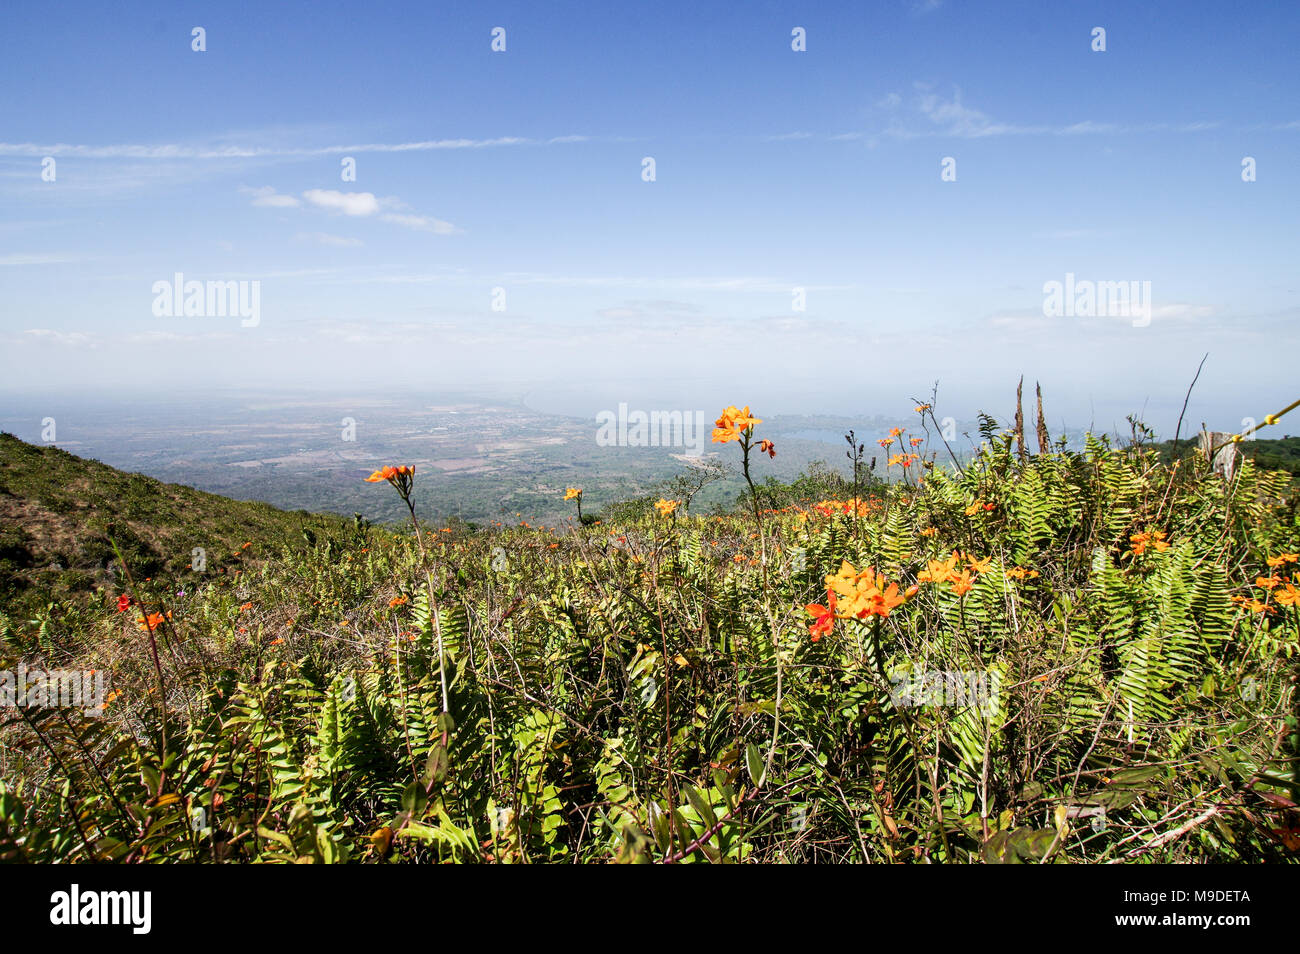 Beautiful nature and views from a vista point on top of Mombacho volcano in Nicaragua, Central America Stock Photo